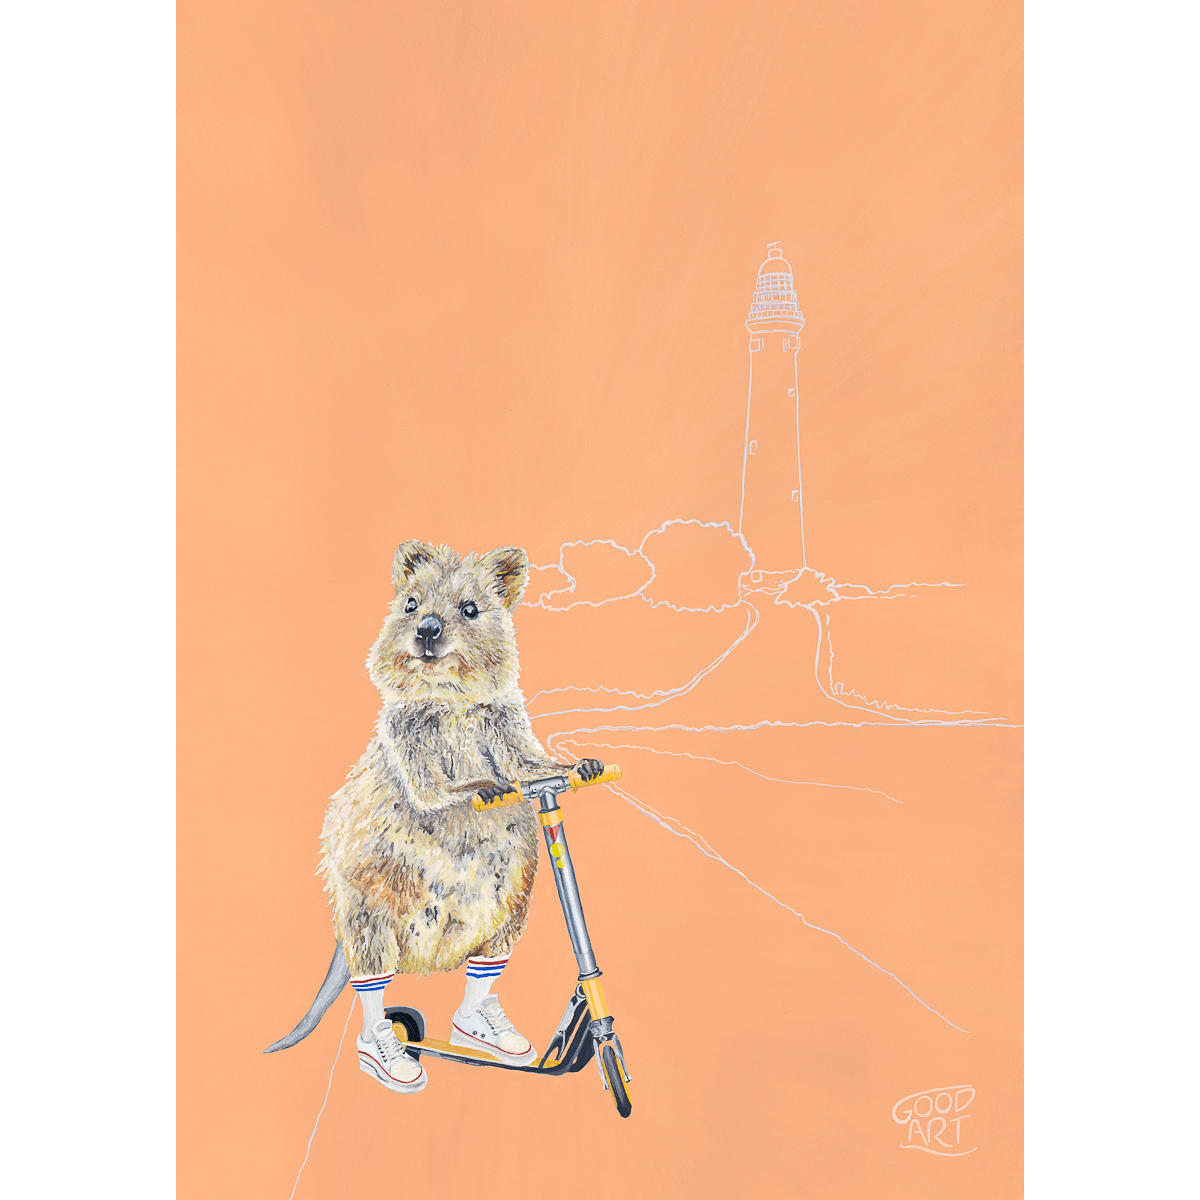 Rottnest Island Quokka kids print painted by artist Jaelle Pedroli. The Quokka is riding a scooter. Apricot coloured background.